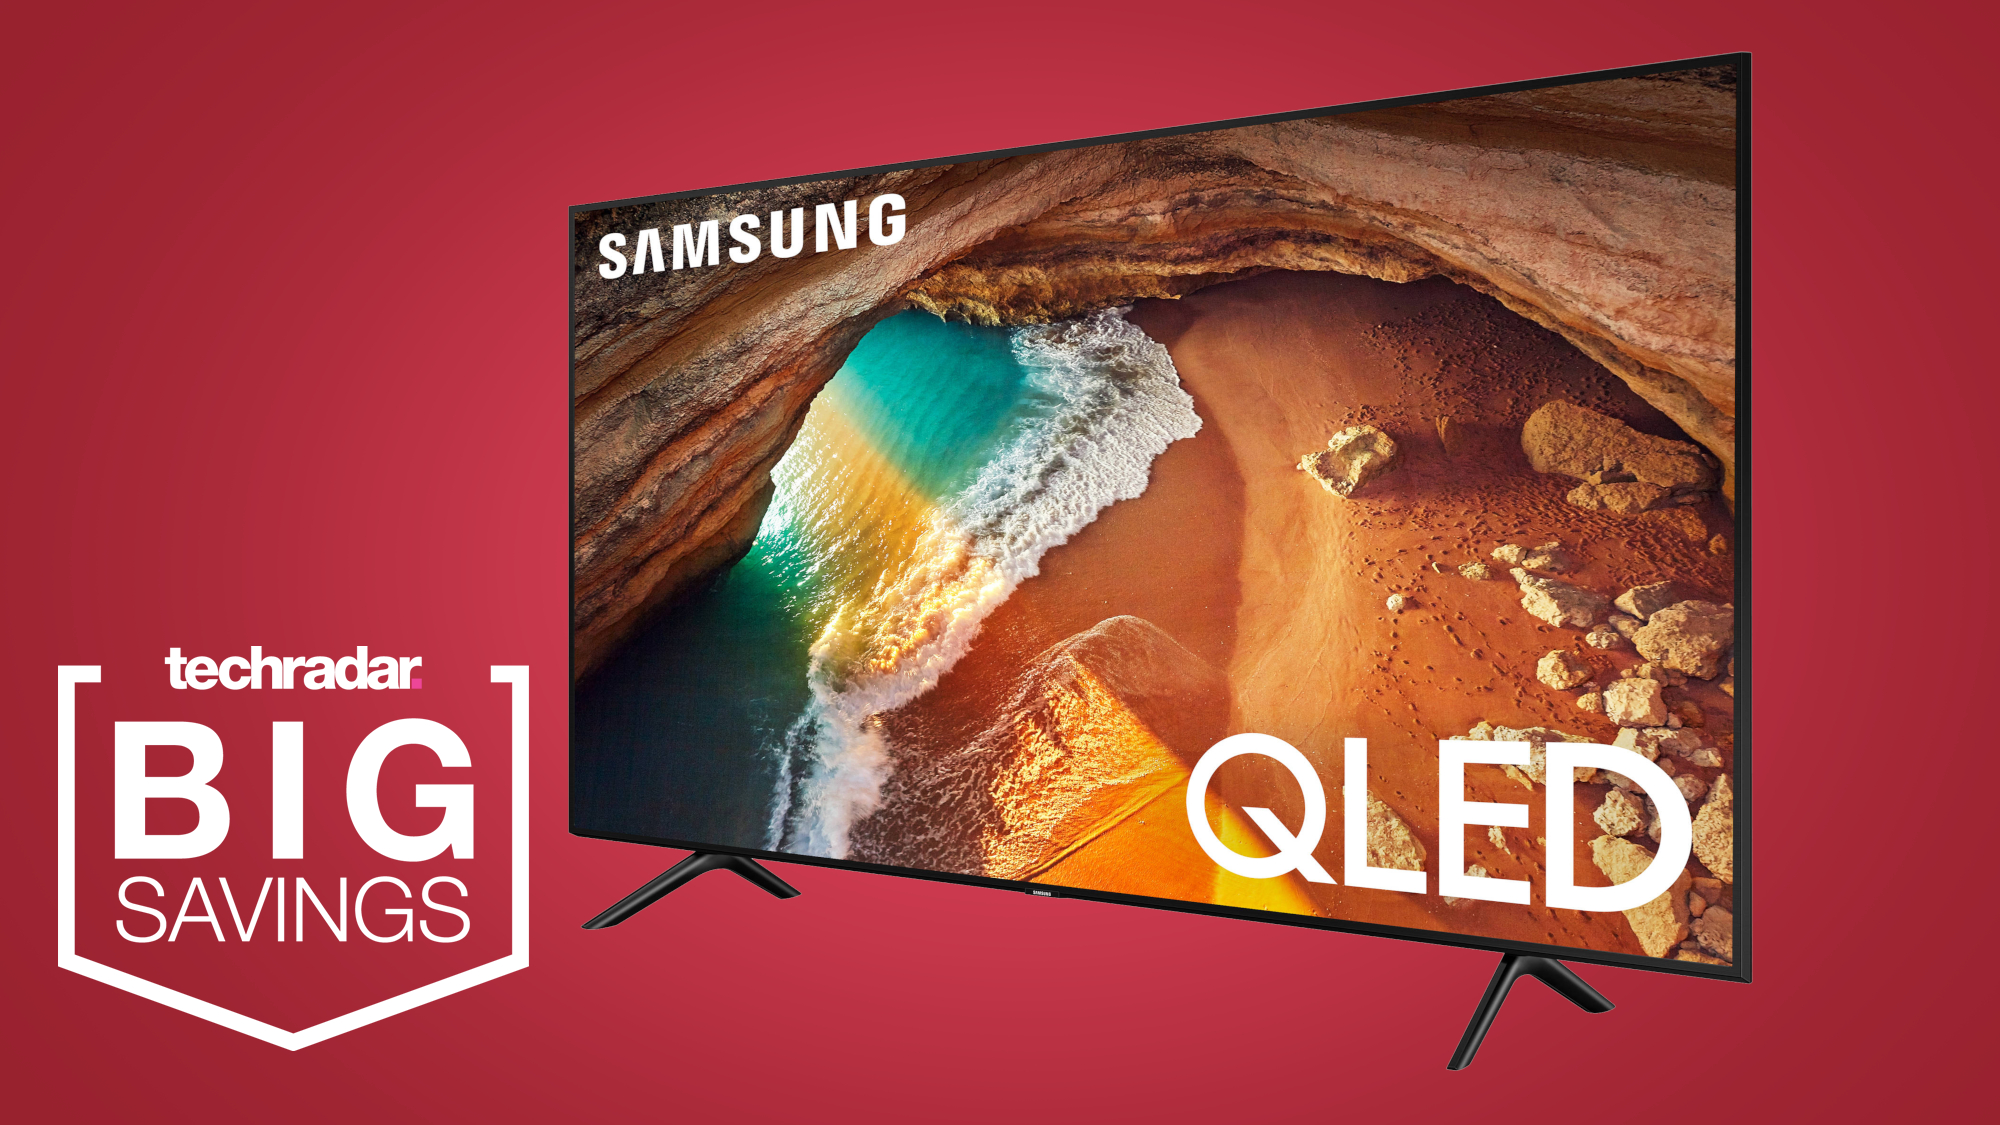 This Samsung 65-inch 4K TV gets a $300 price cut at Best Buy - today only!